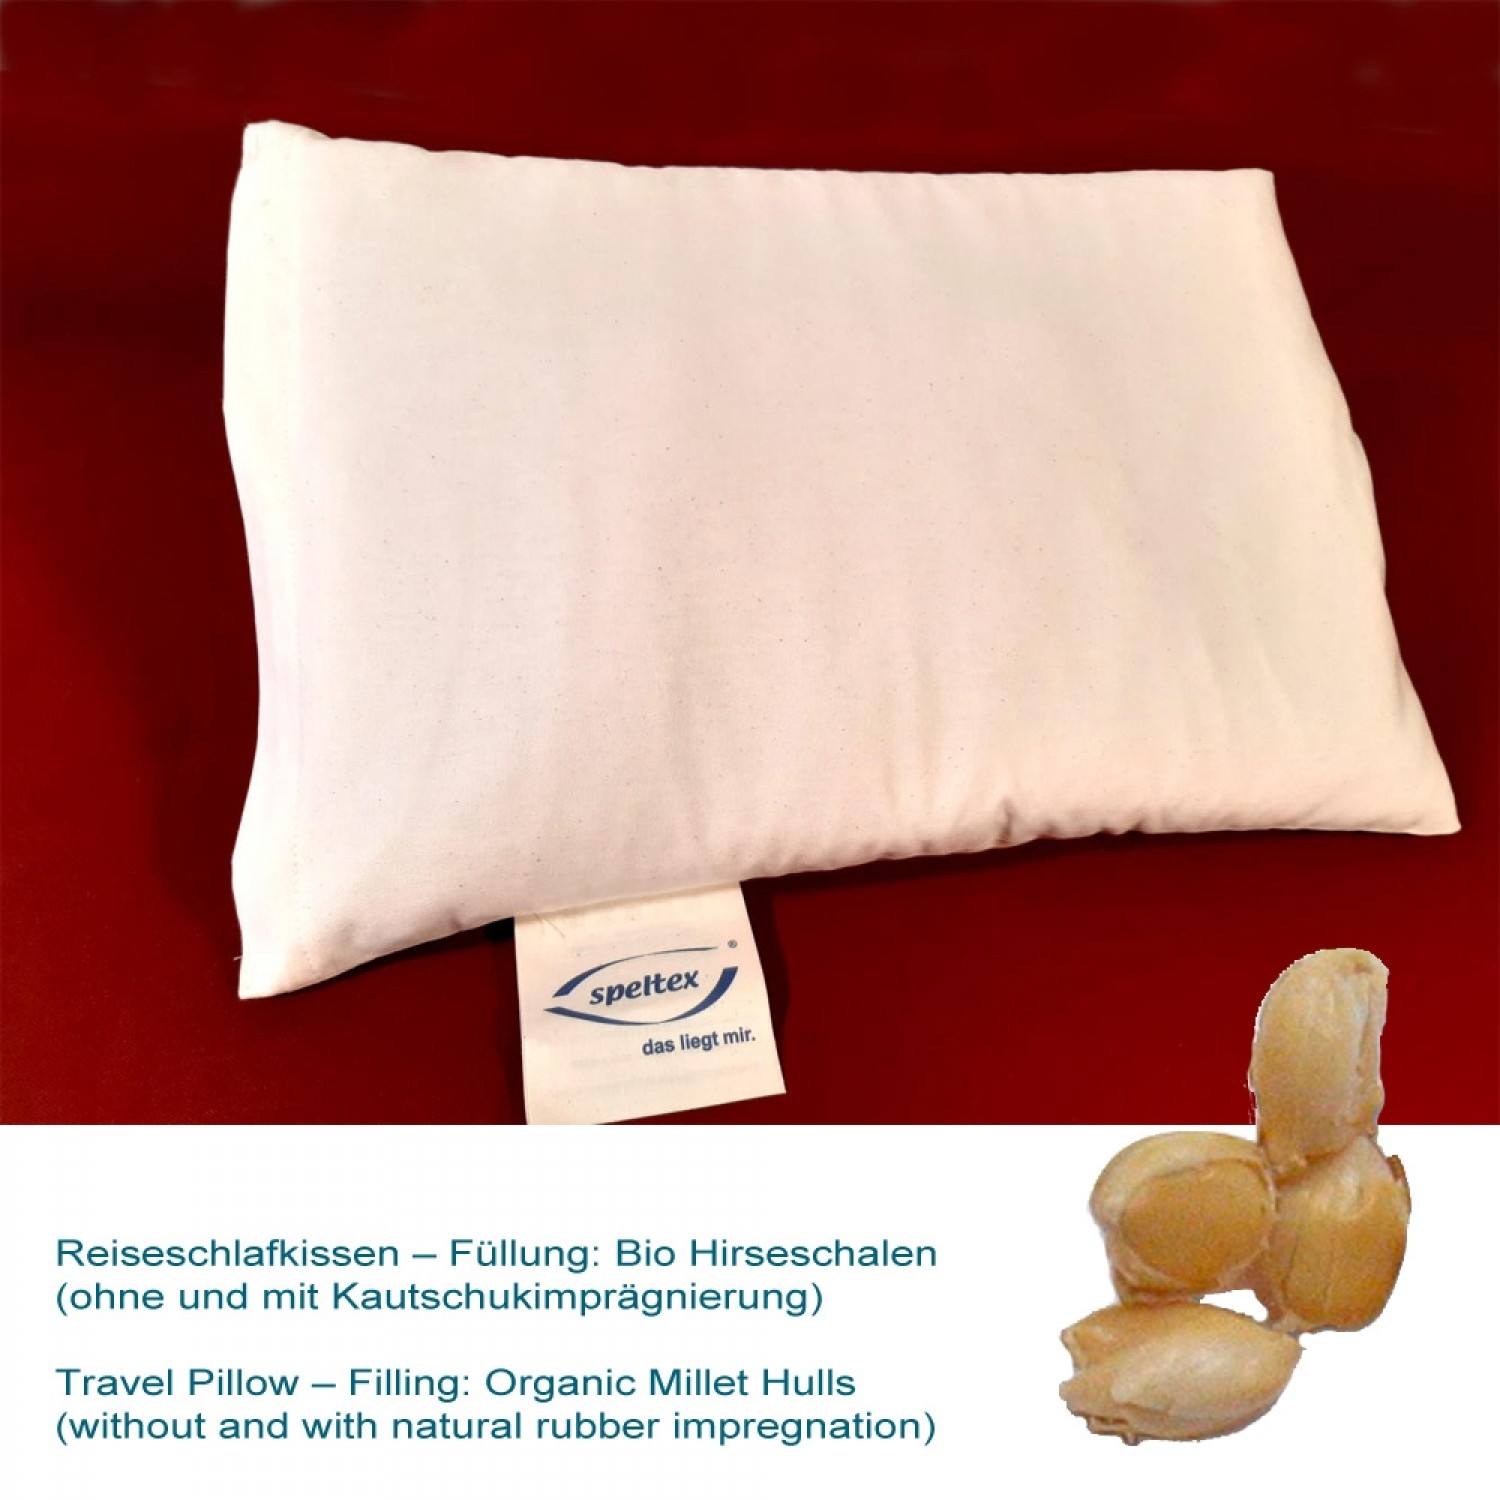 Travel Pillow with organic millet hulls & natural rubber | speltex